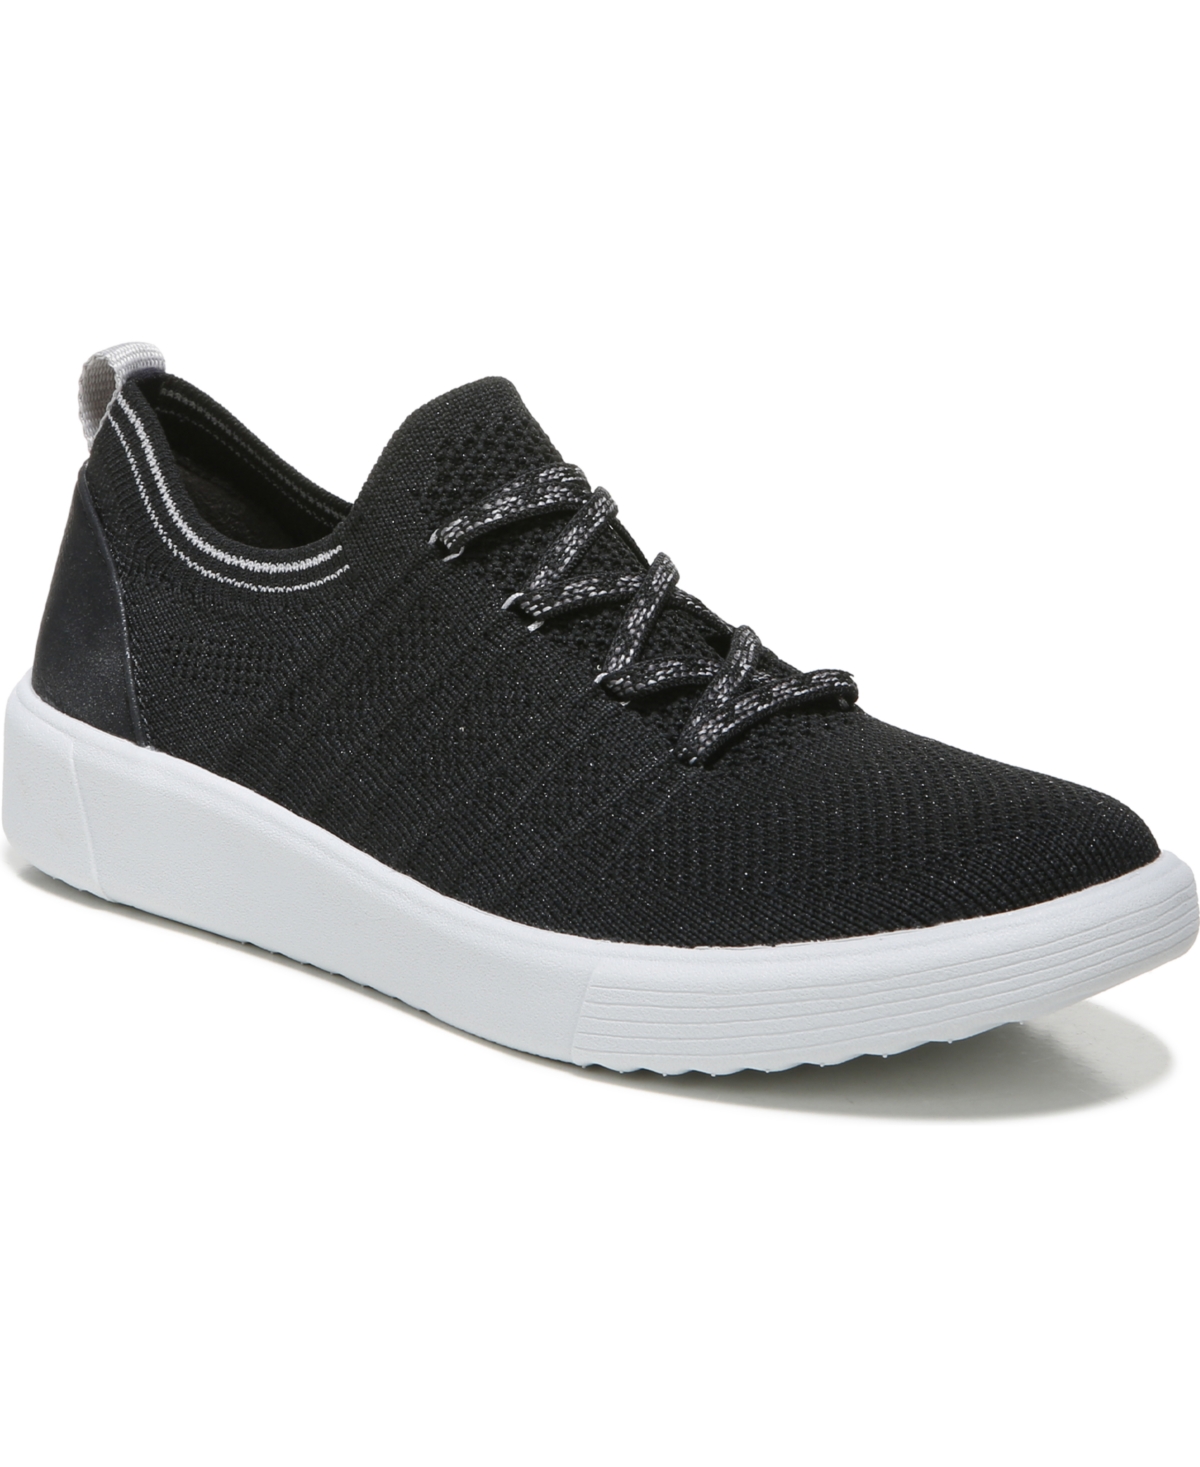 March On Washable Slip-on Sneakers - Black Knit Fabric